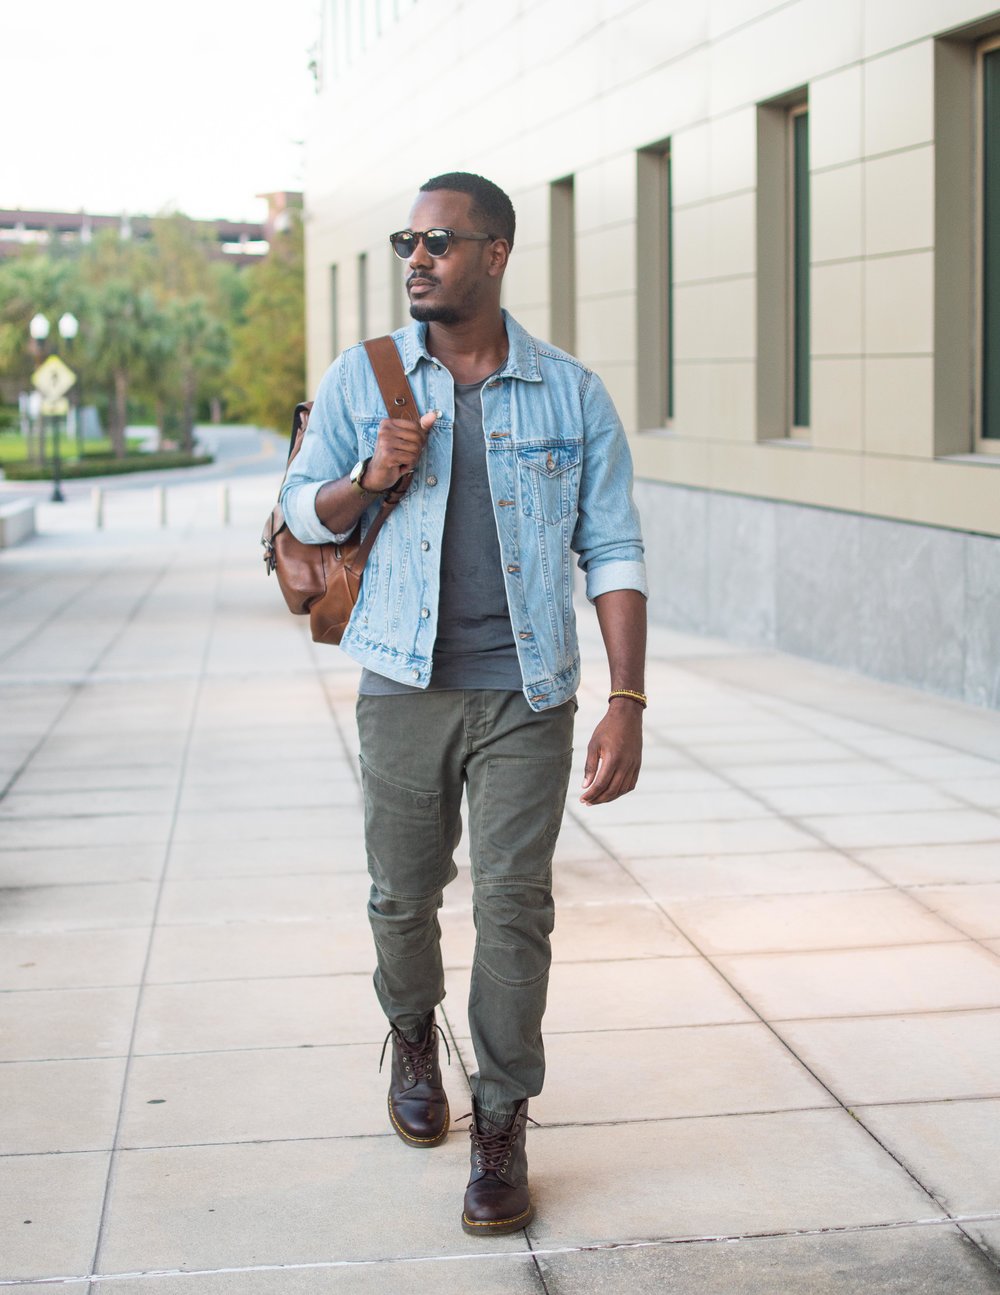 How to Wear a Denim Jacket (3 Easy Ways) — Greg's Style Guide